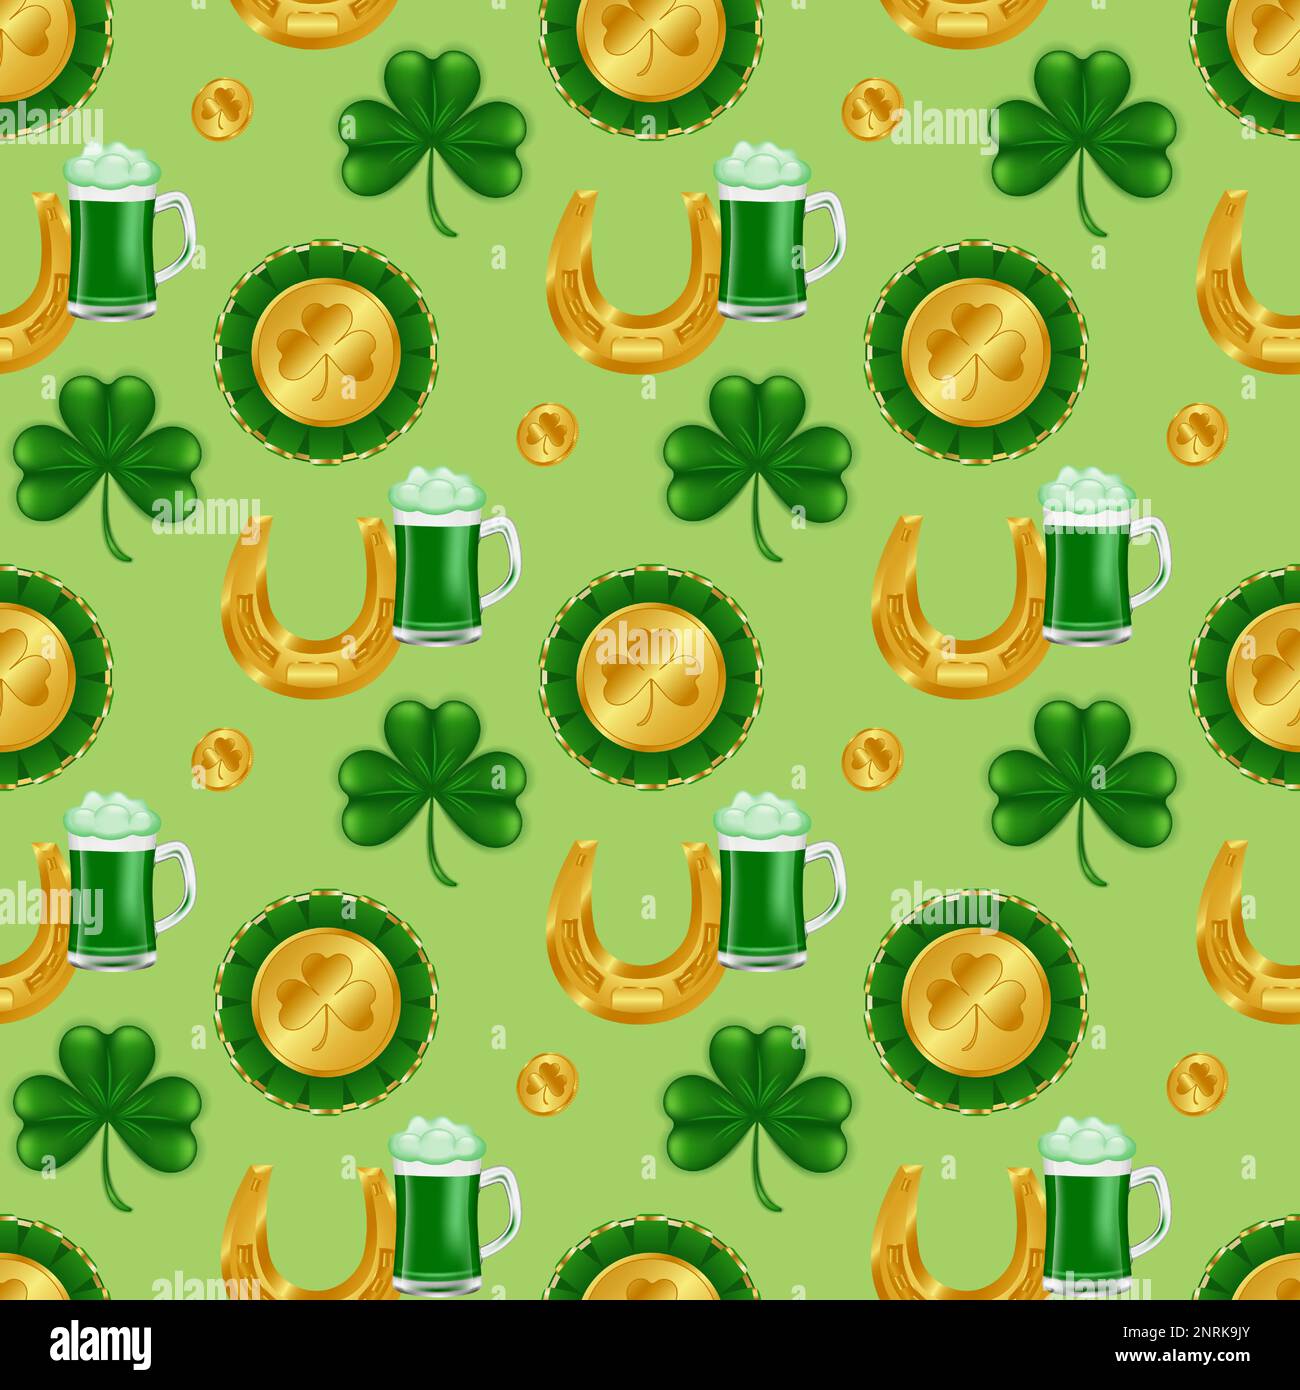 Celebrate St. Patrick's Day with this seamless pattern featuring golden horseshoes, coins, clover leaves, and a full pint of green beer or ale. Perfec Stock Vector